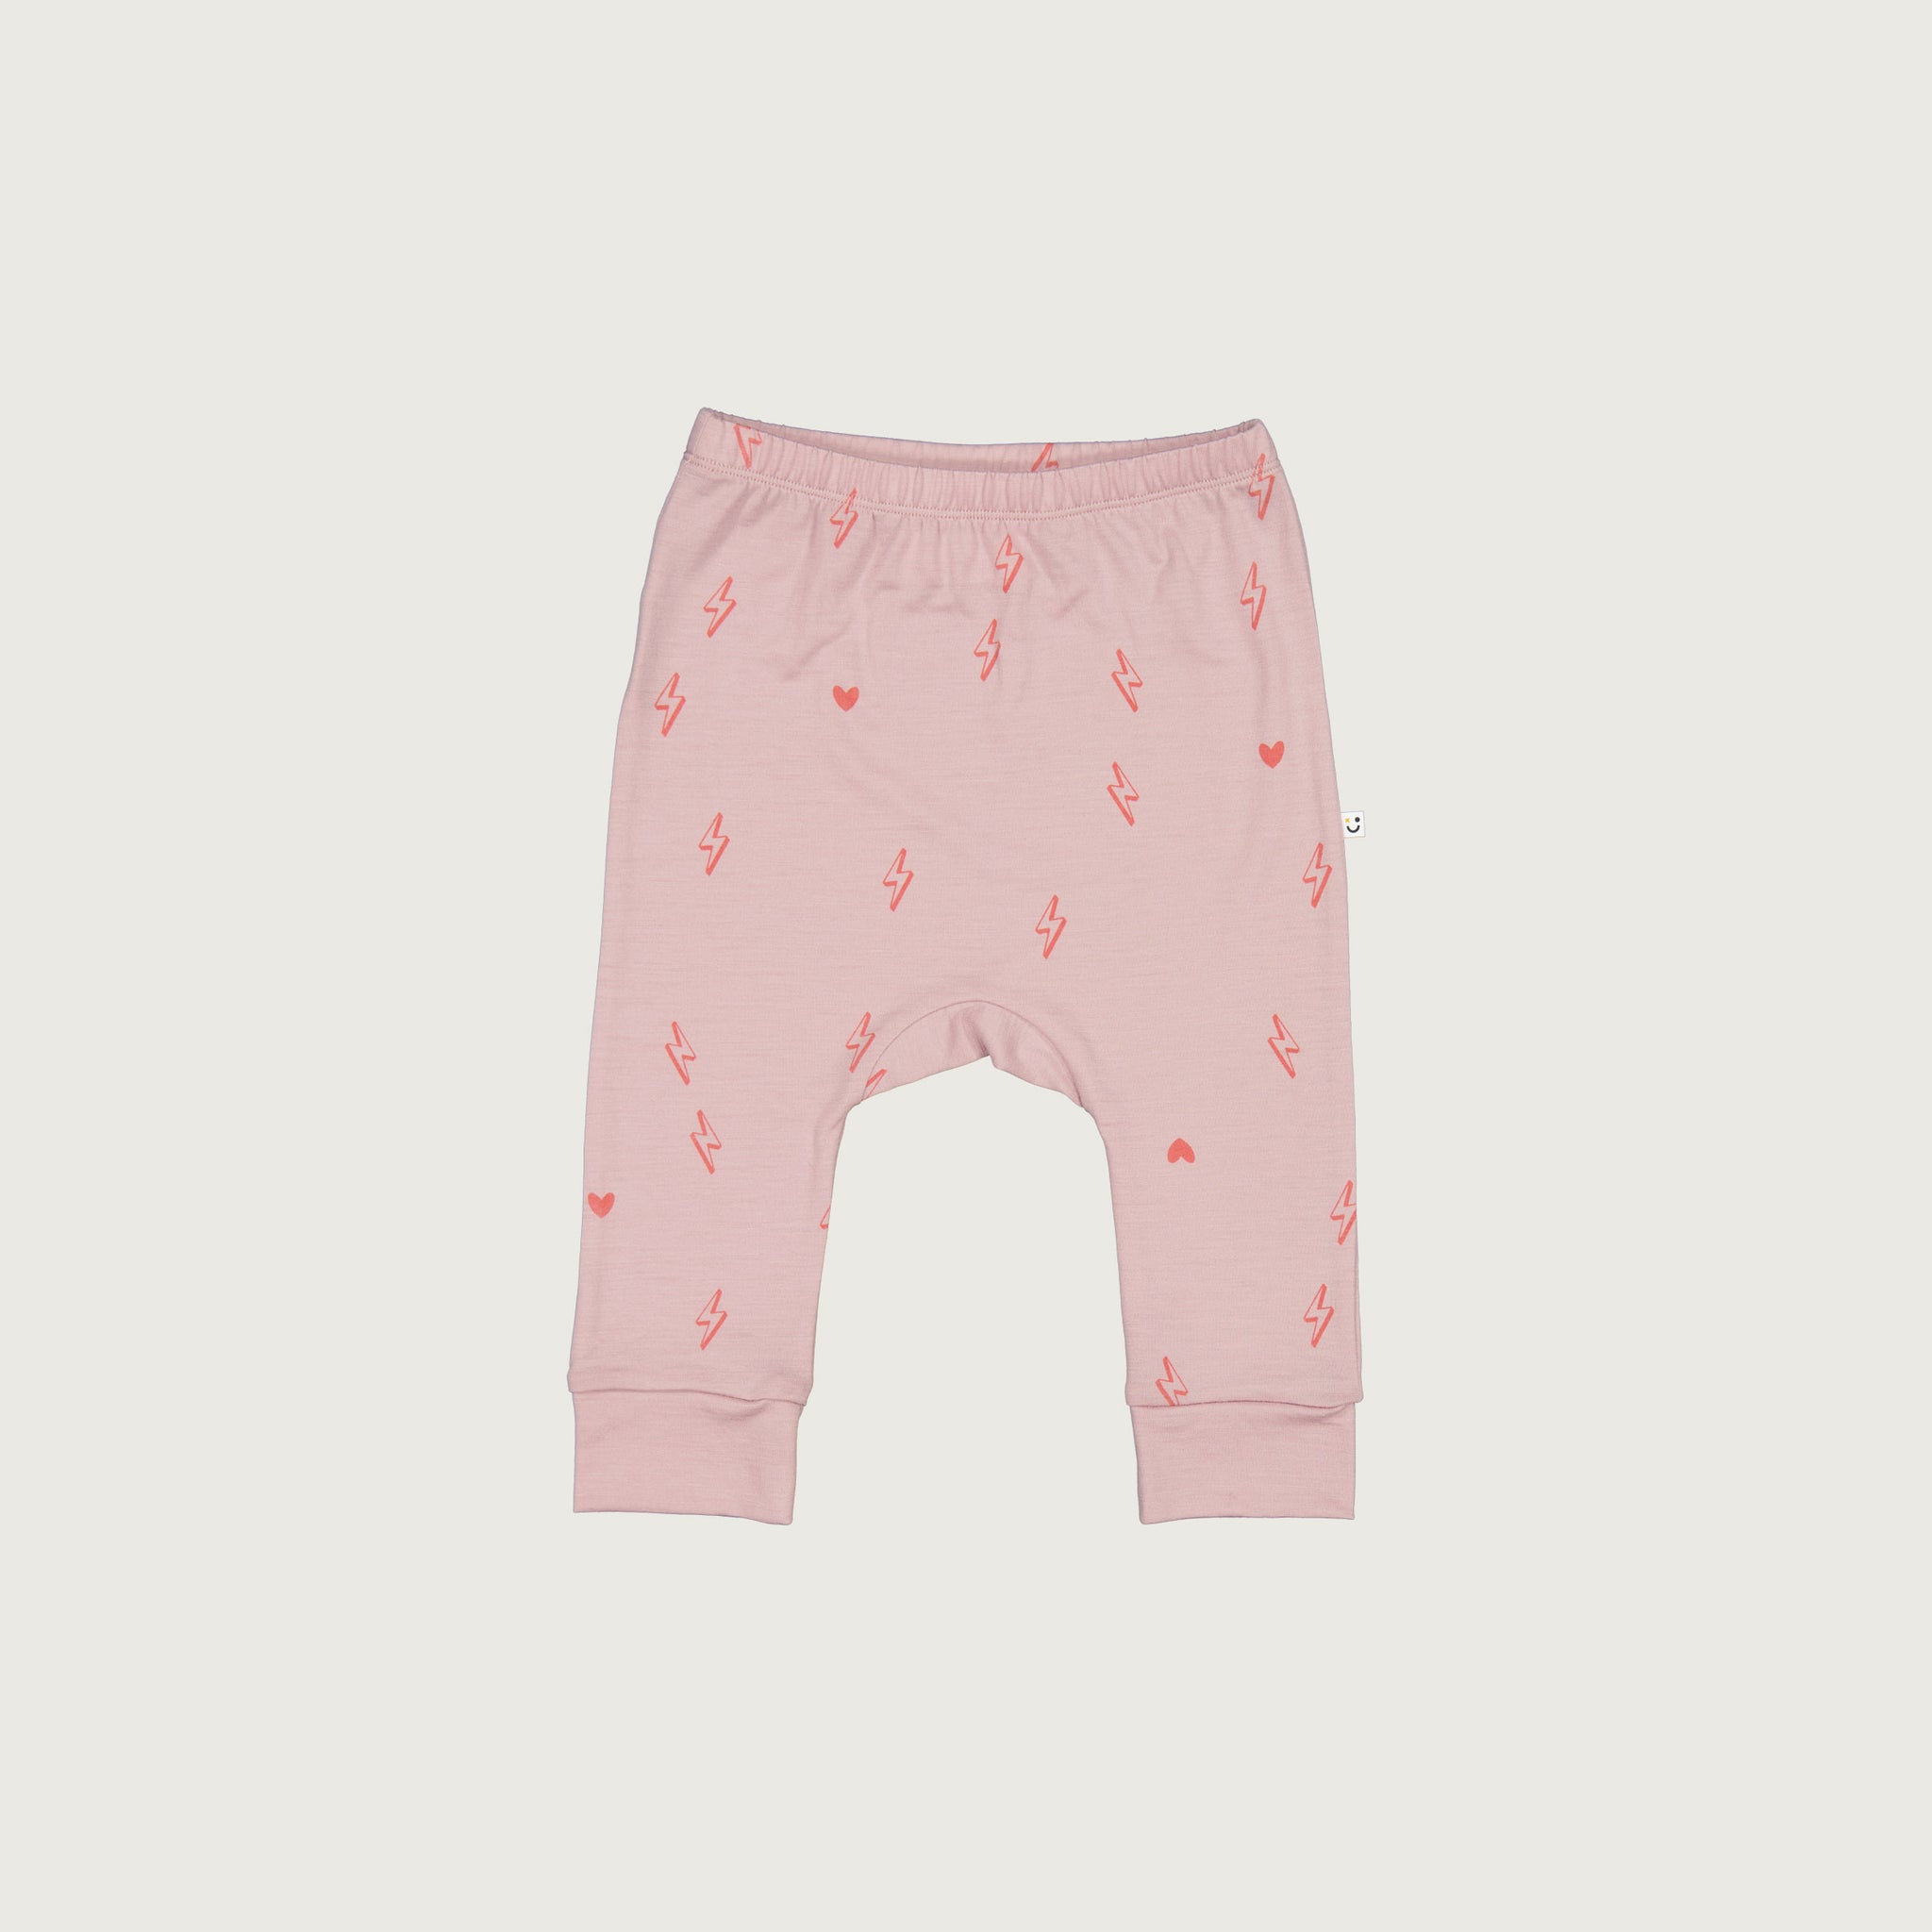 Merino baby slouch pants blush pink with print